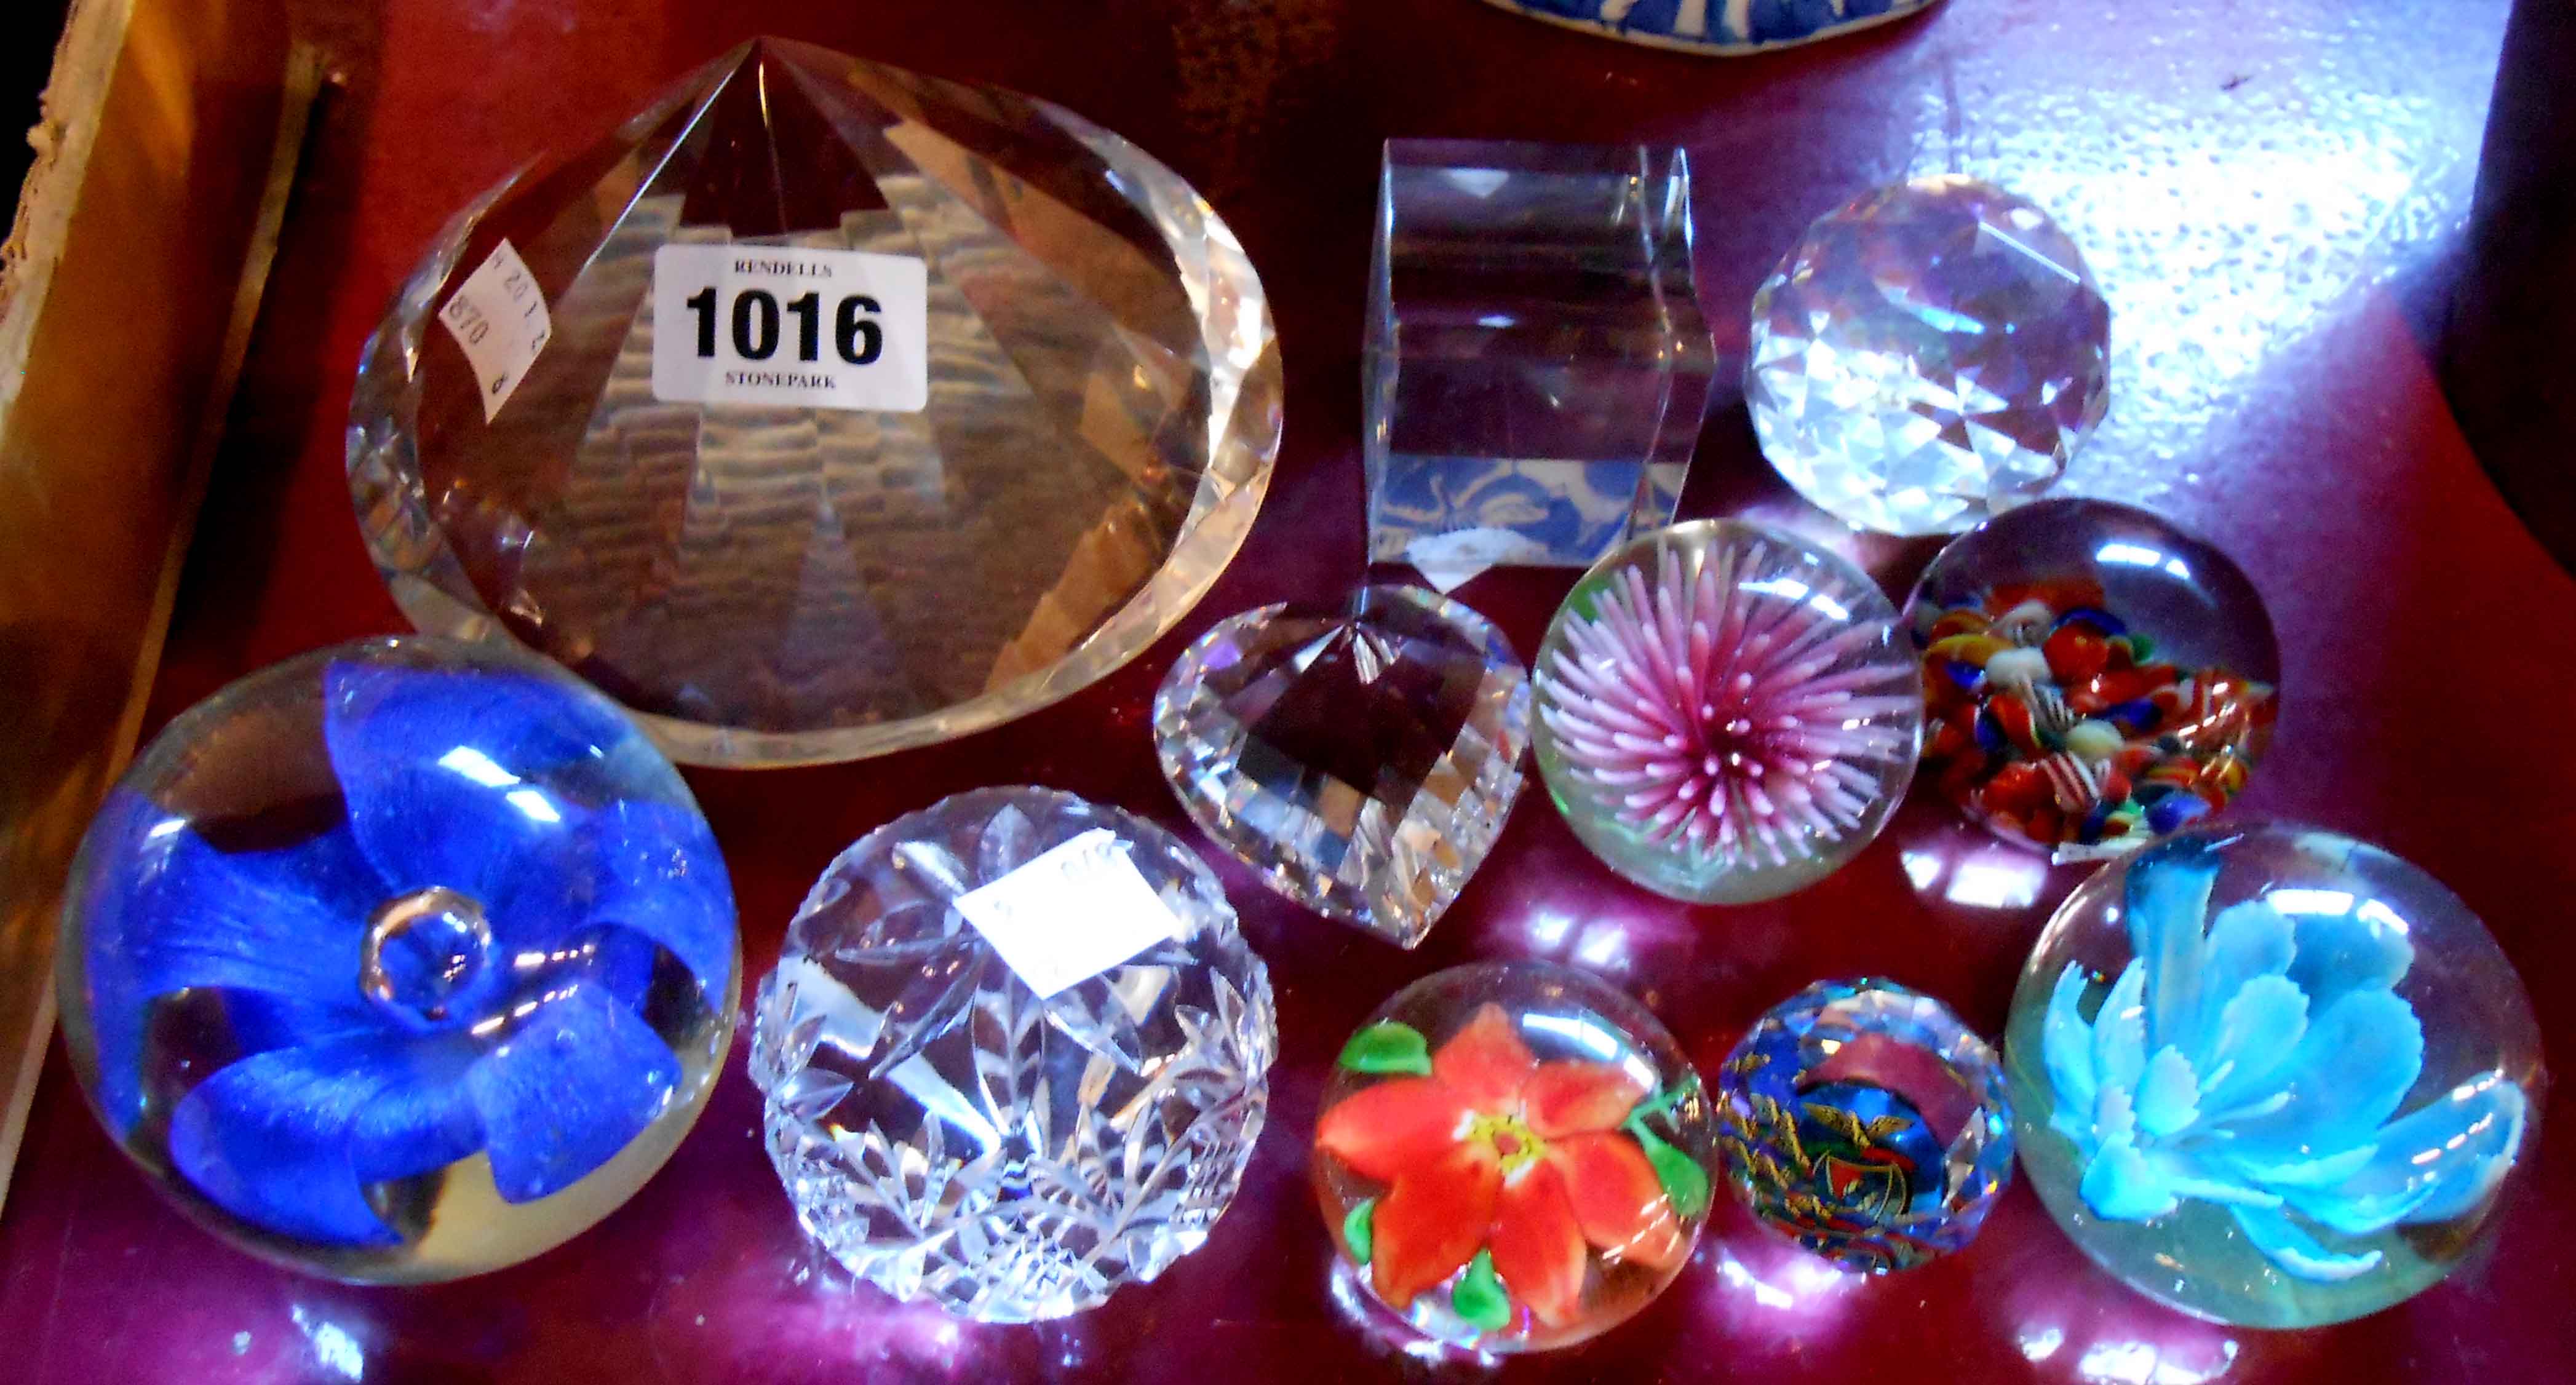 A quantity of glass paperweights - sold with a large crystal 'diamond' on stand